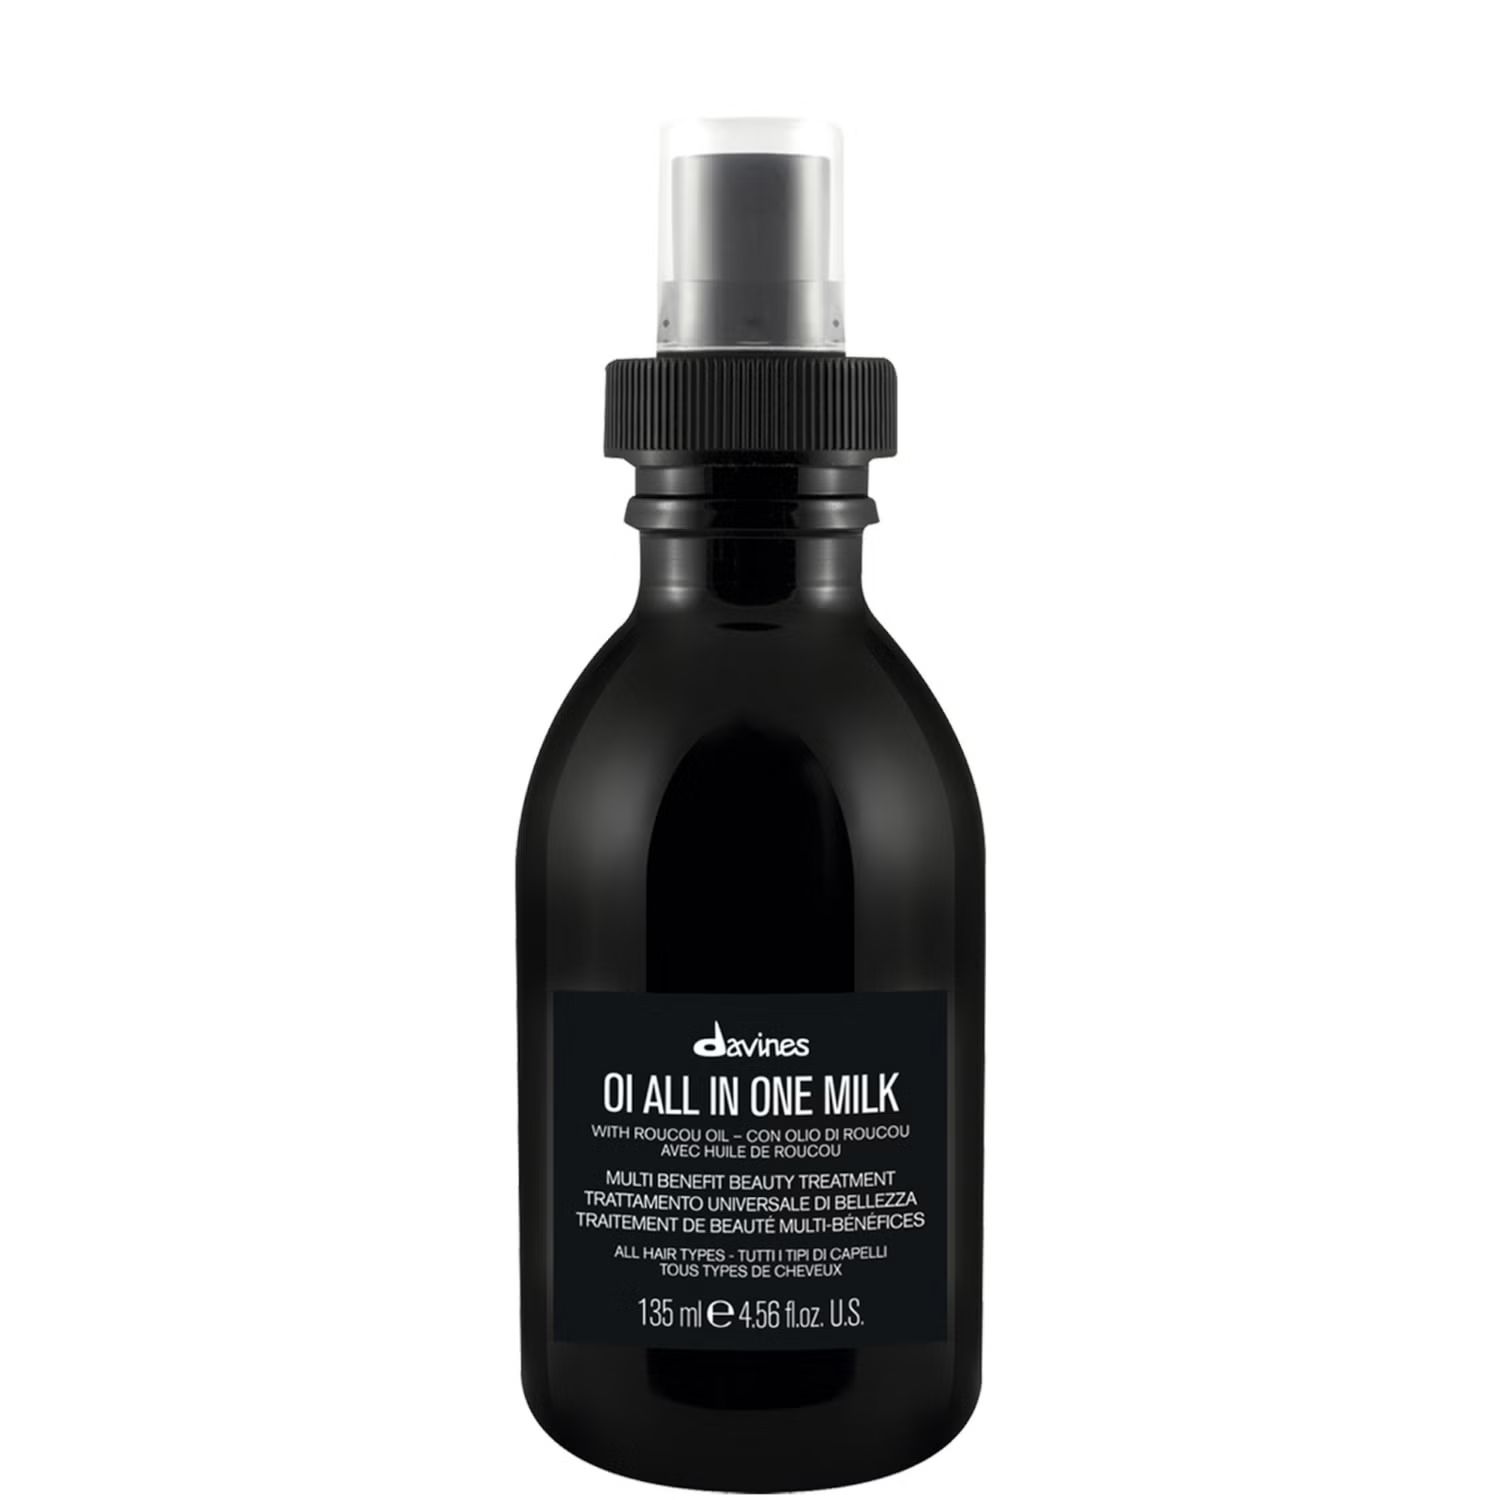 Davines Oi All-in-One Milk 135ml | Cult Beauty